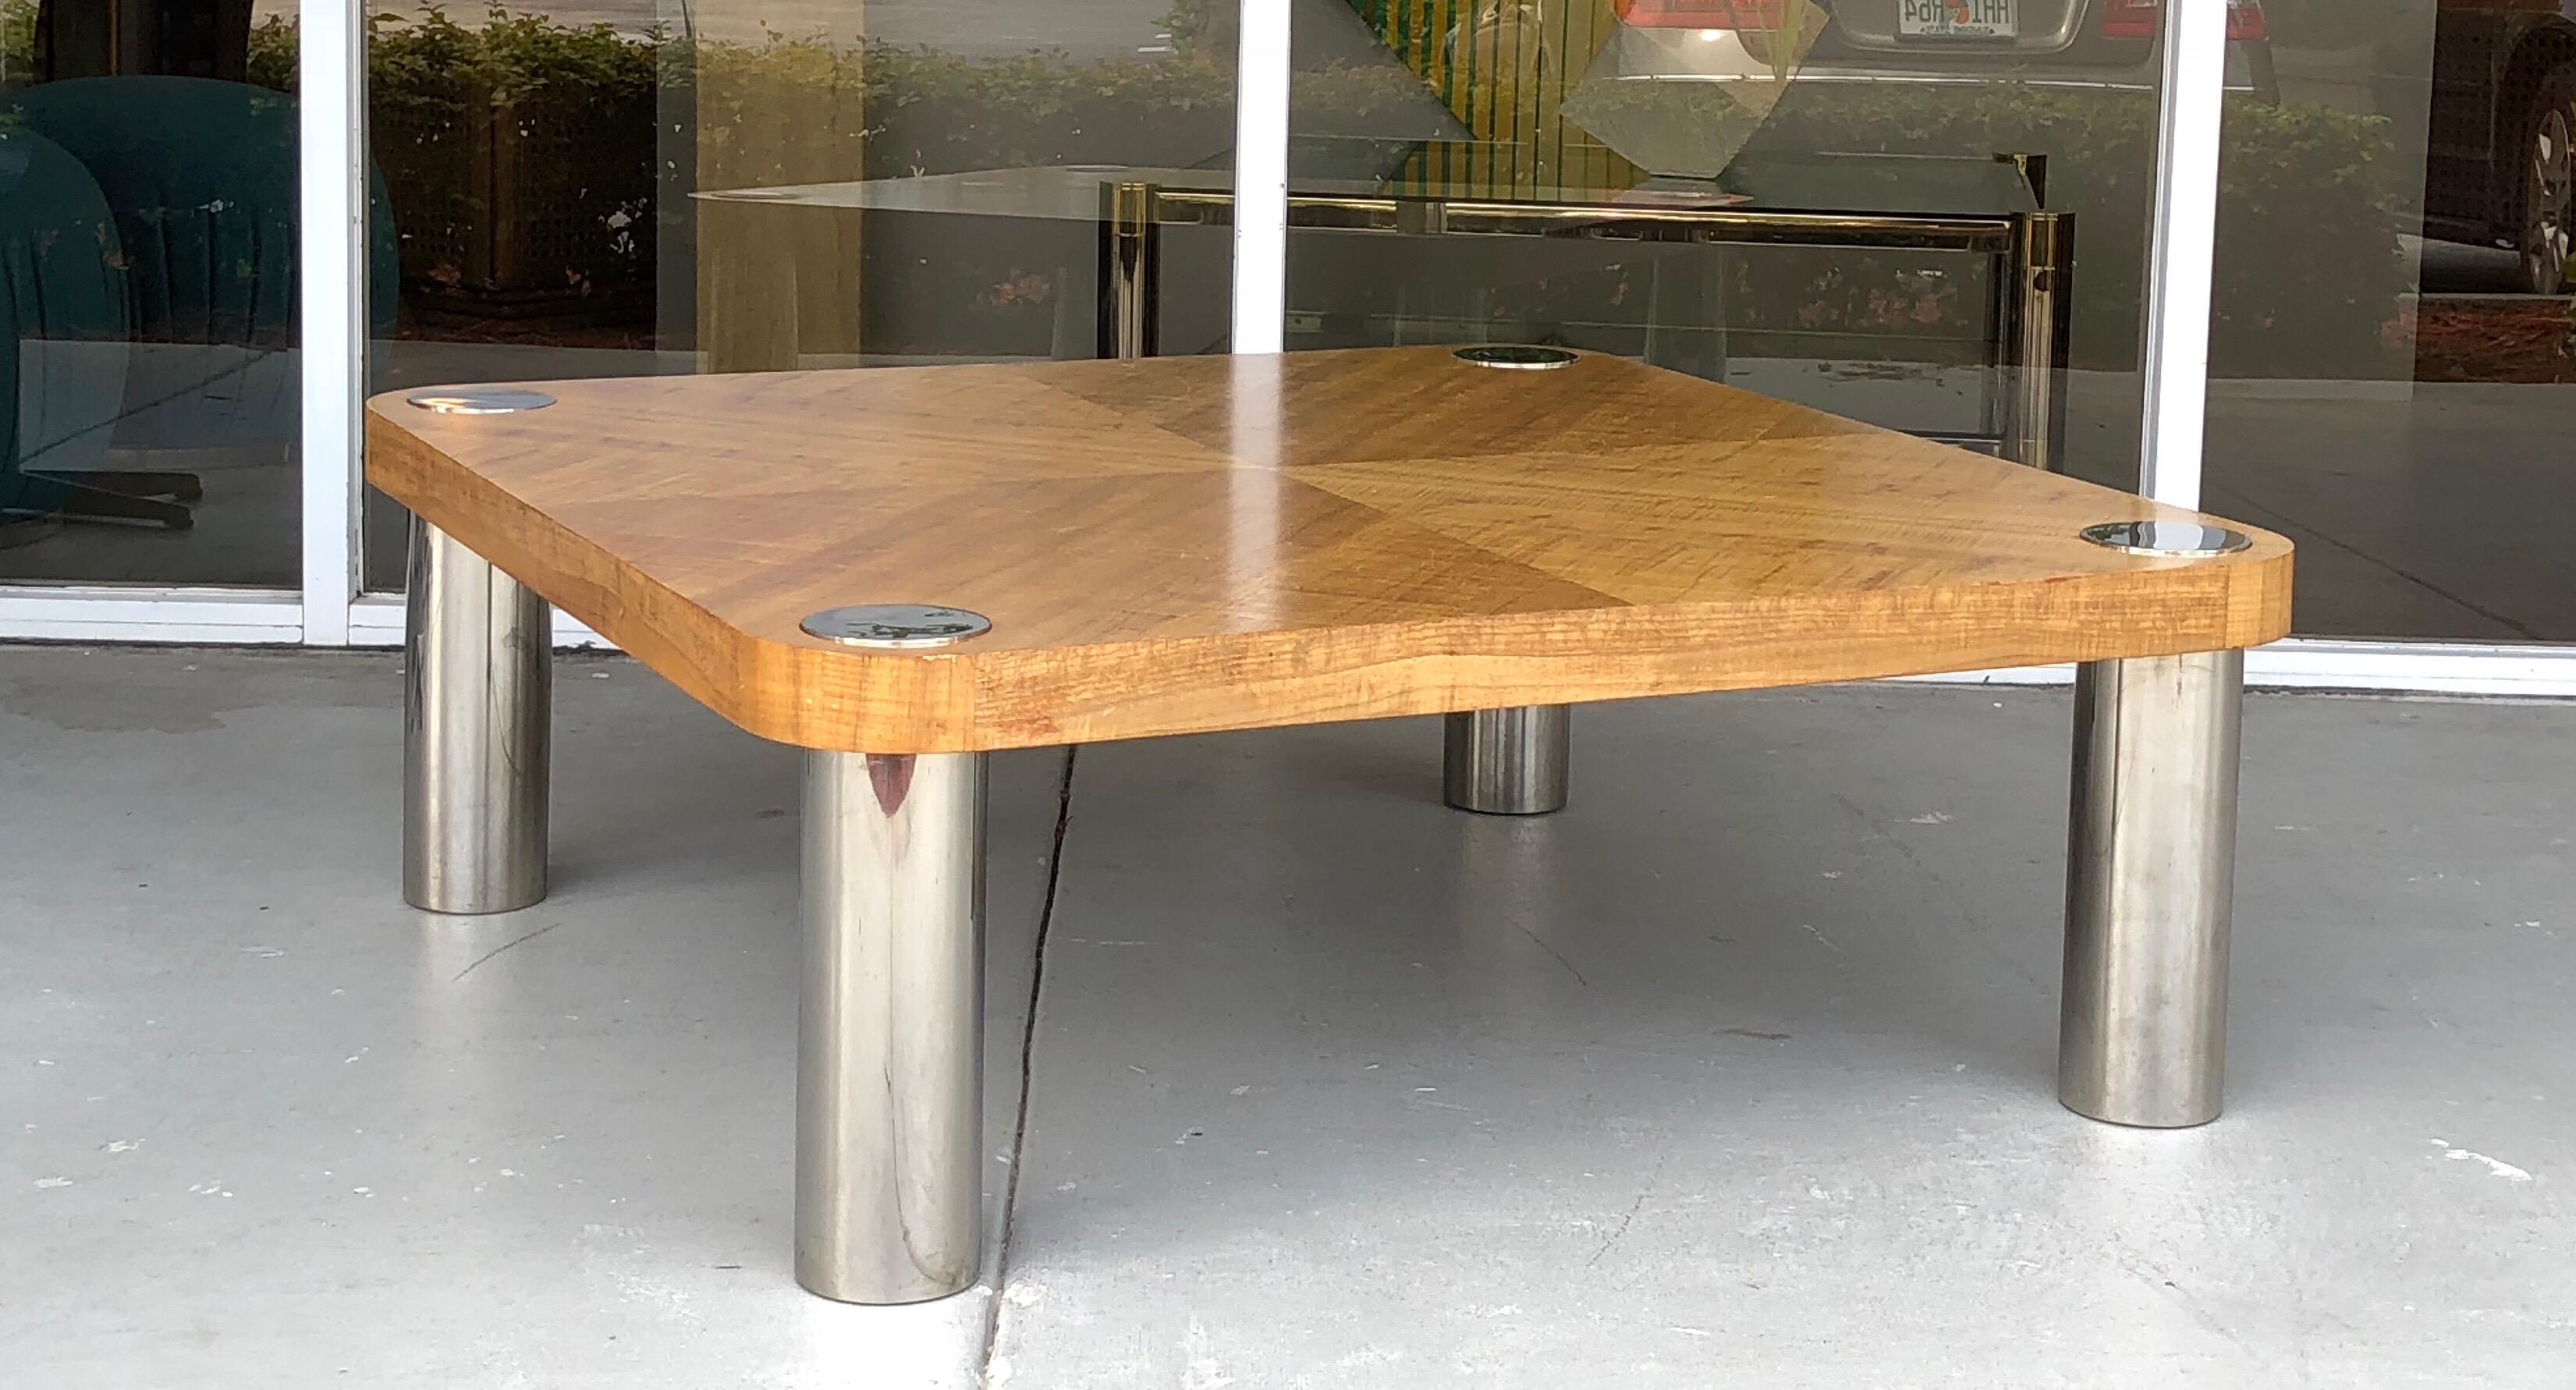 A Vladimir Kagan designed coffee table. The wood on top creates a subtle modern pattern. Large polished stainless legs. Signed on verso of top with label.